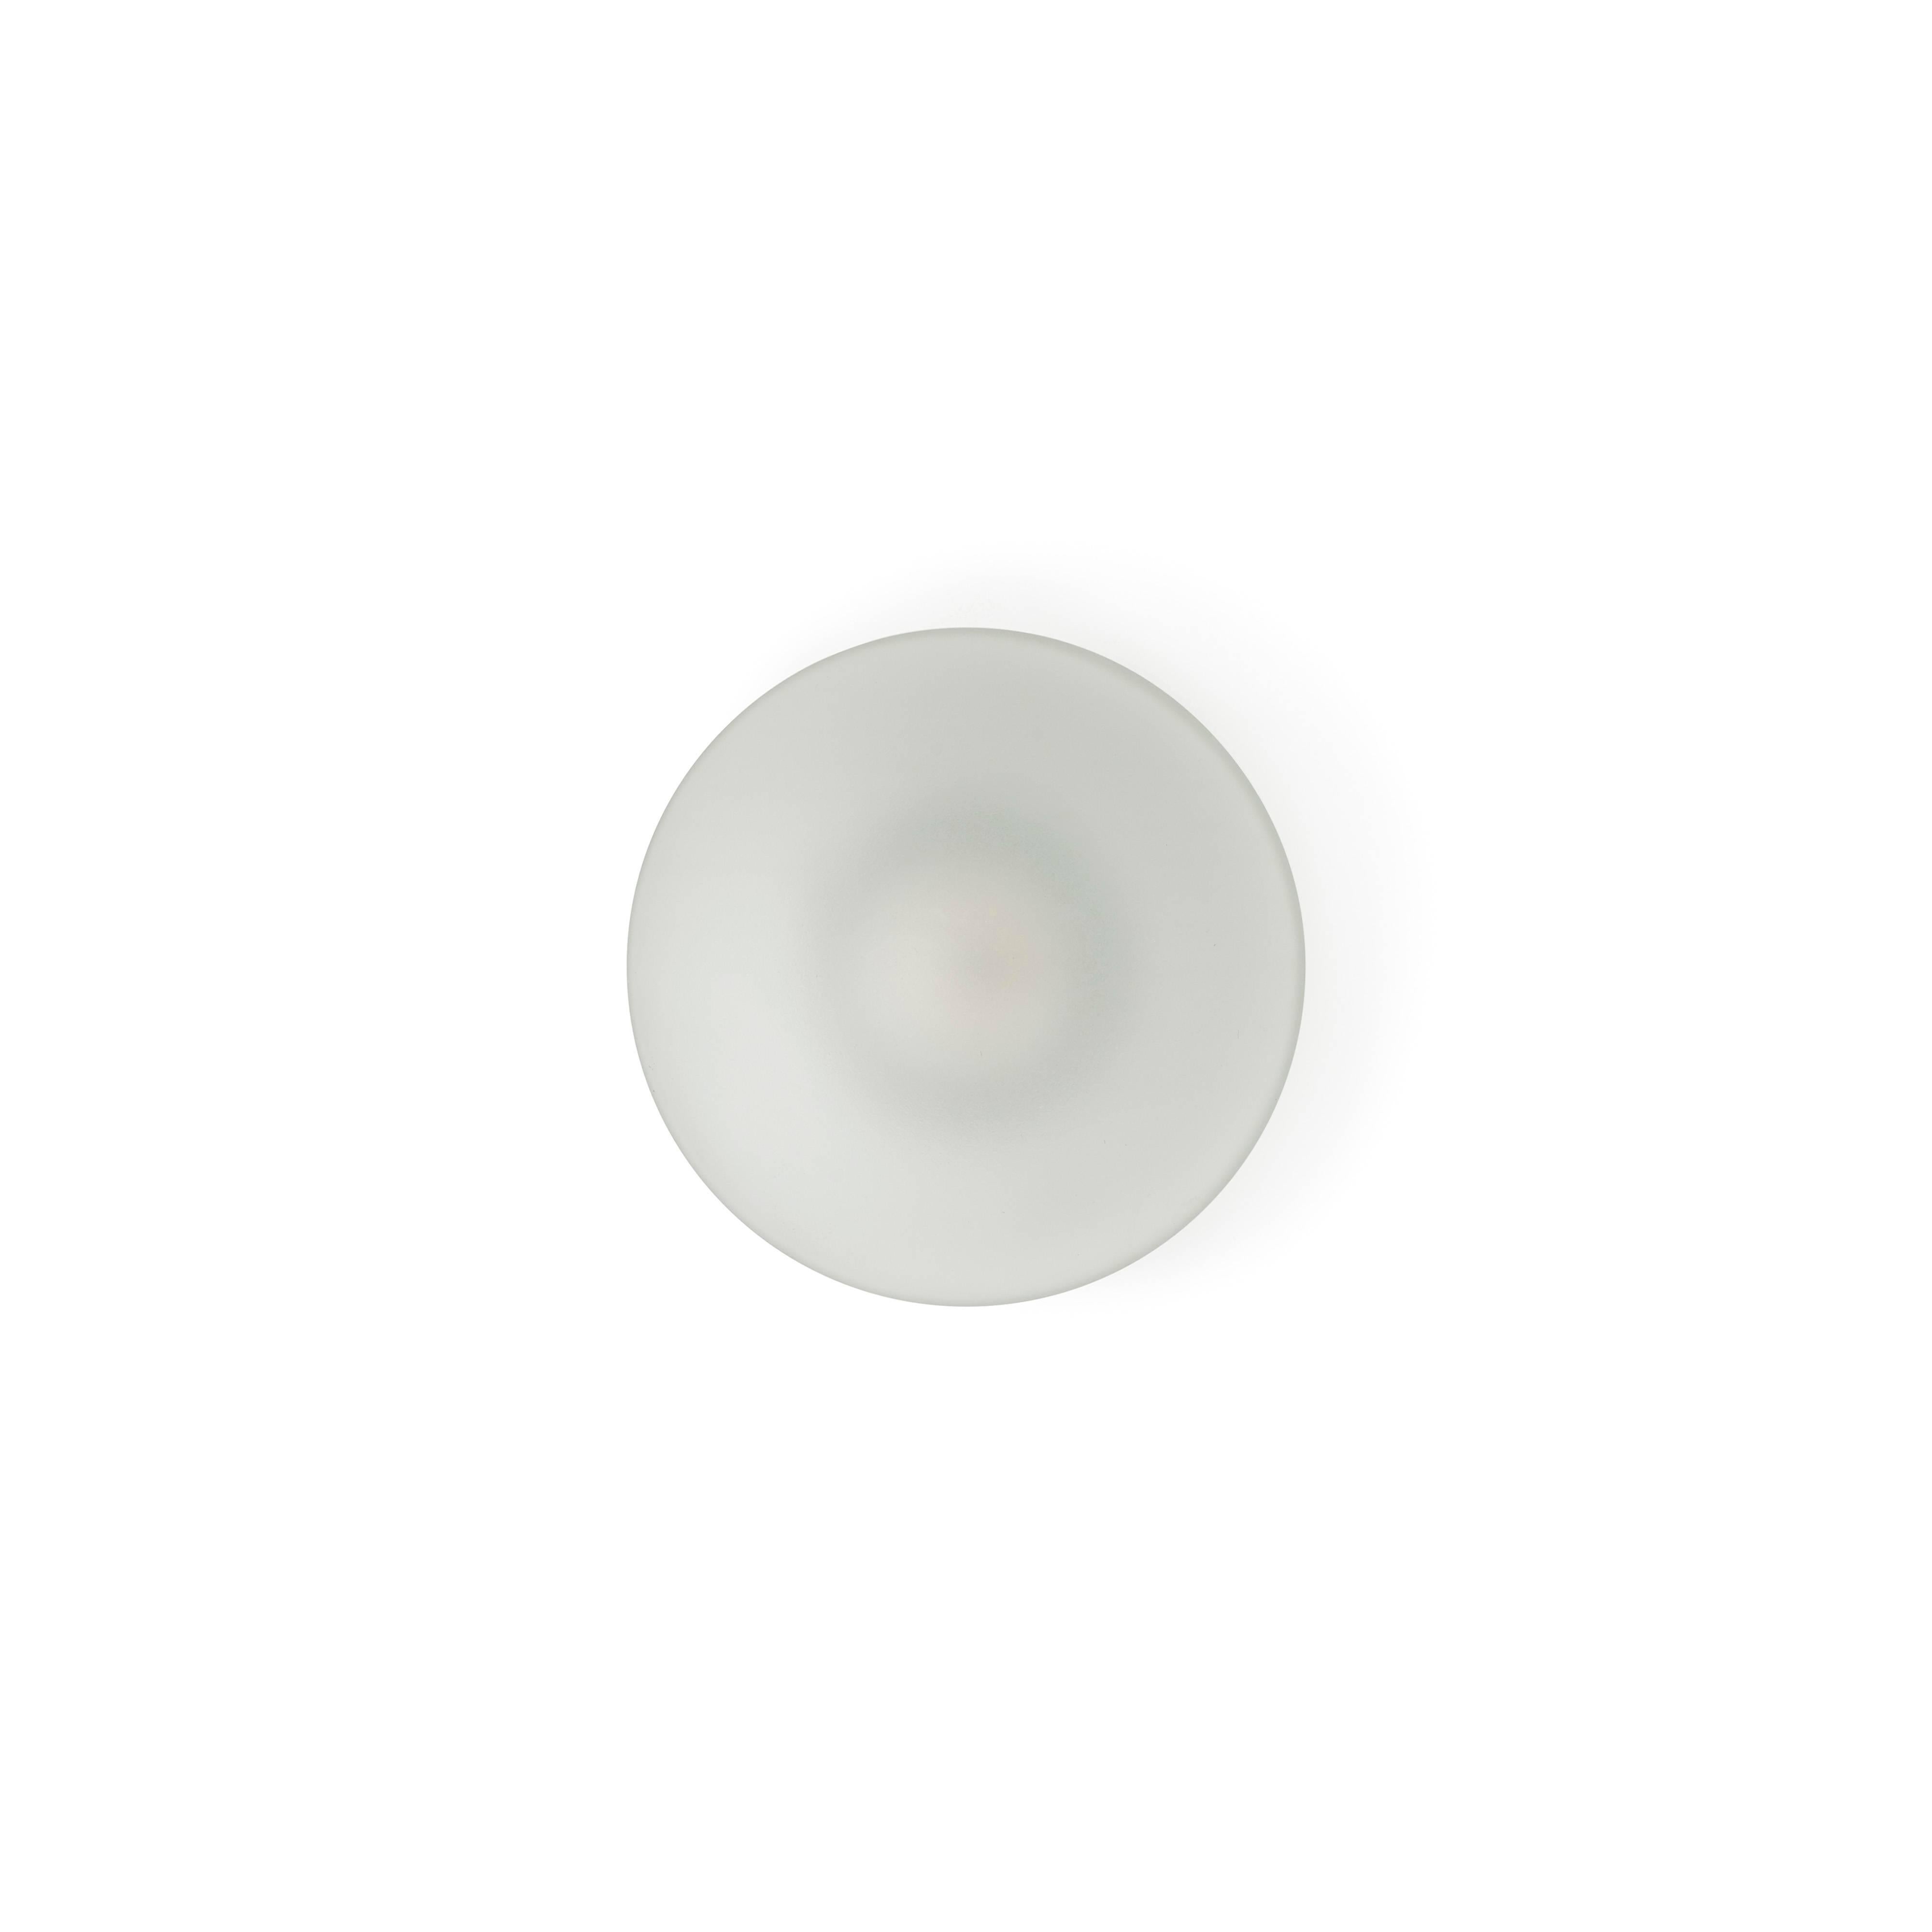 Designed for either wall or ceiling installation, Sillaba combines discretion and pureness, furnishing any room with its minimal presence.

Available in three sizes:

ø 3.5” × 2.3”. 
Bulbs: 1×20 W 12V T4 Bi Pin 6.35.
$181.00.

ø 4.7” ×